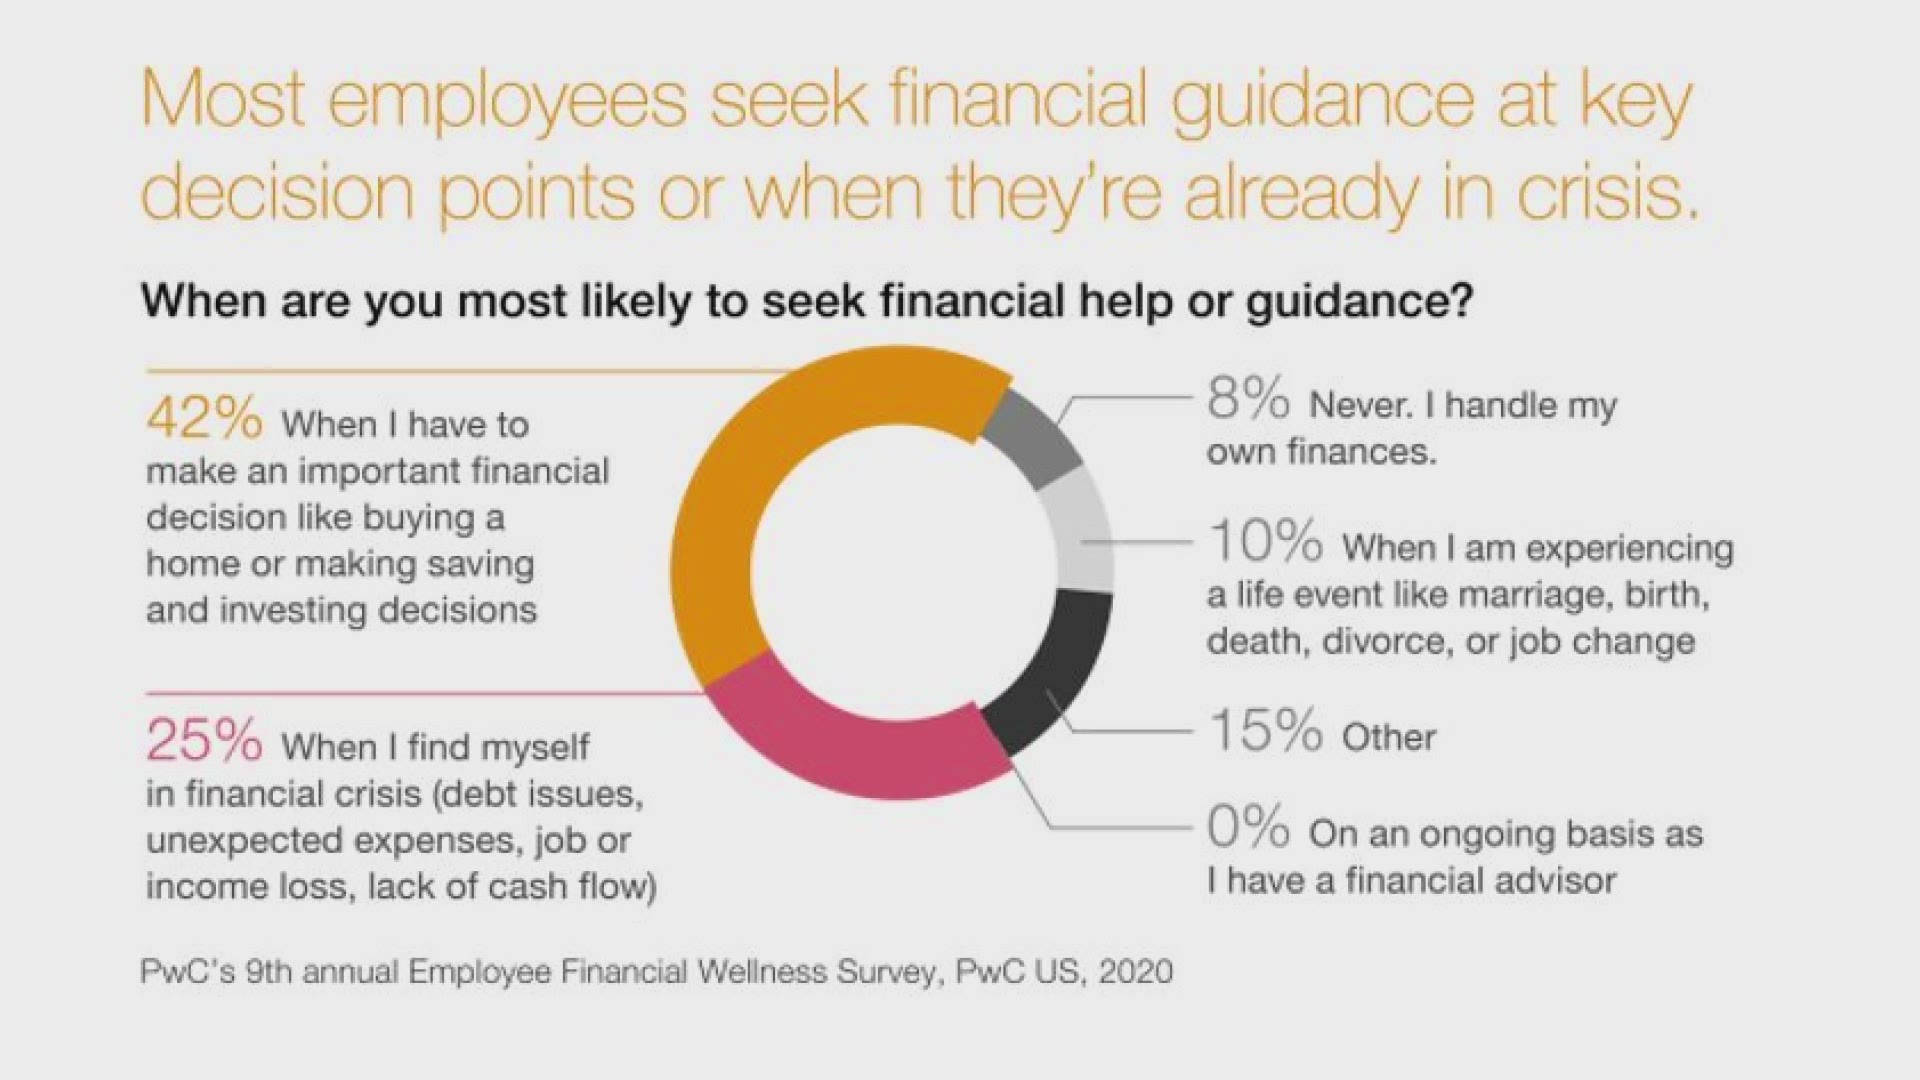 Brenda Pollock explains how employers can help ease the stress on employees by helping guide them through financial stress.